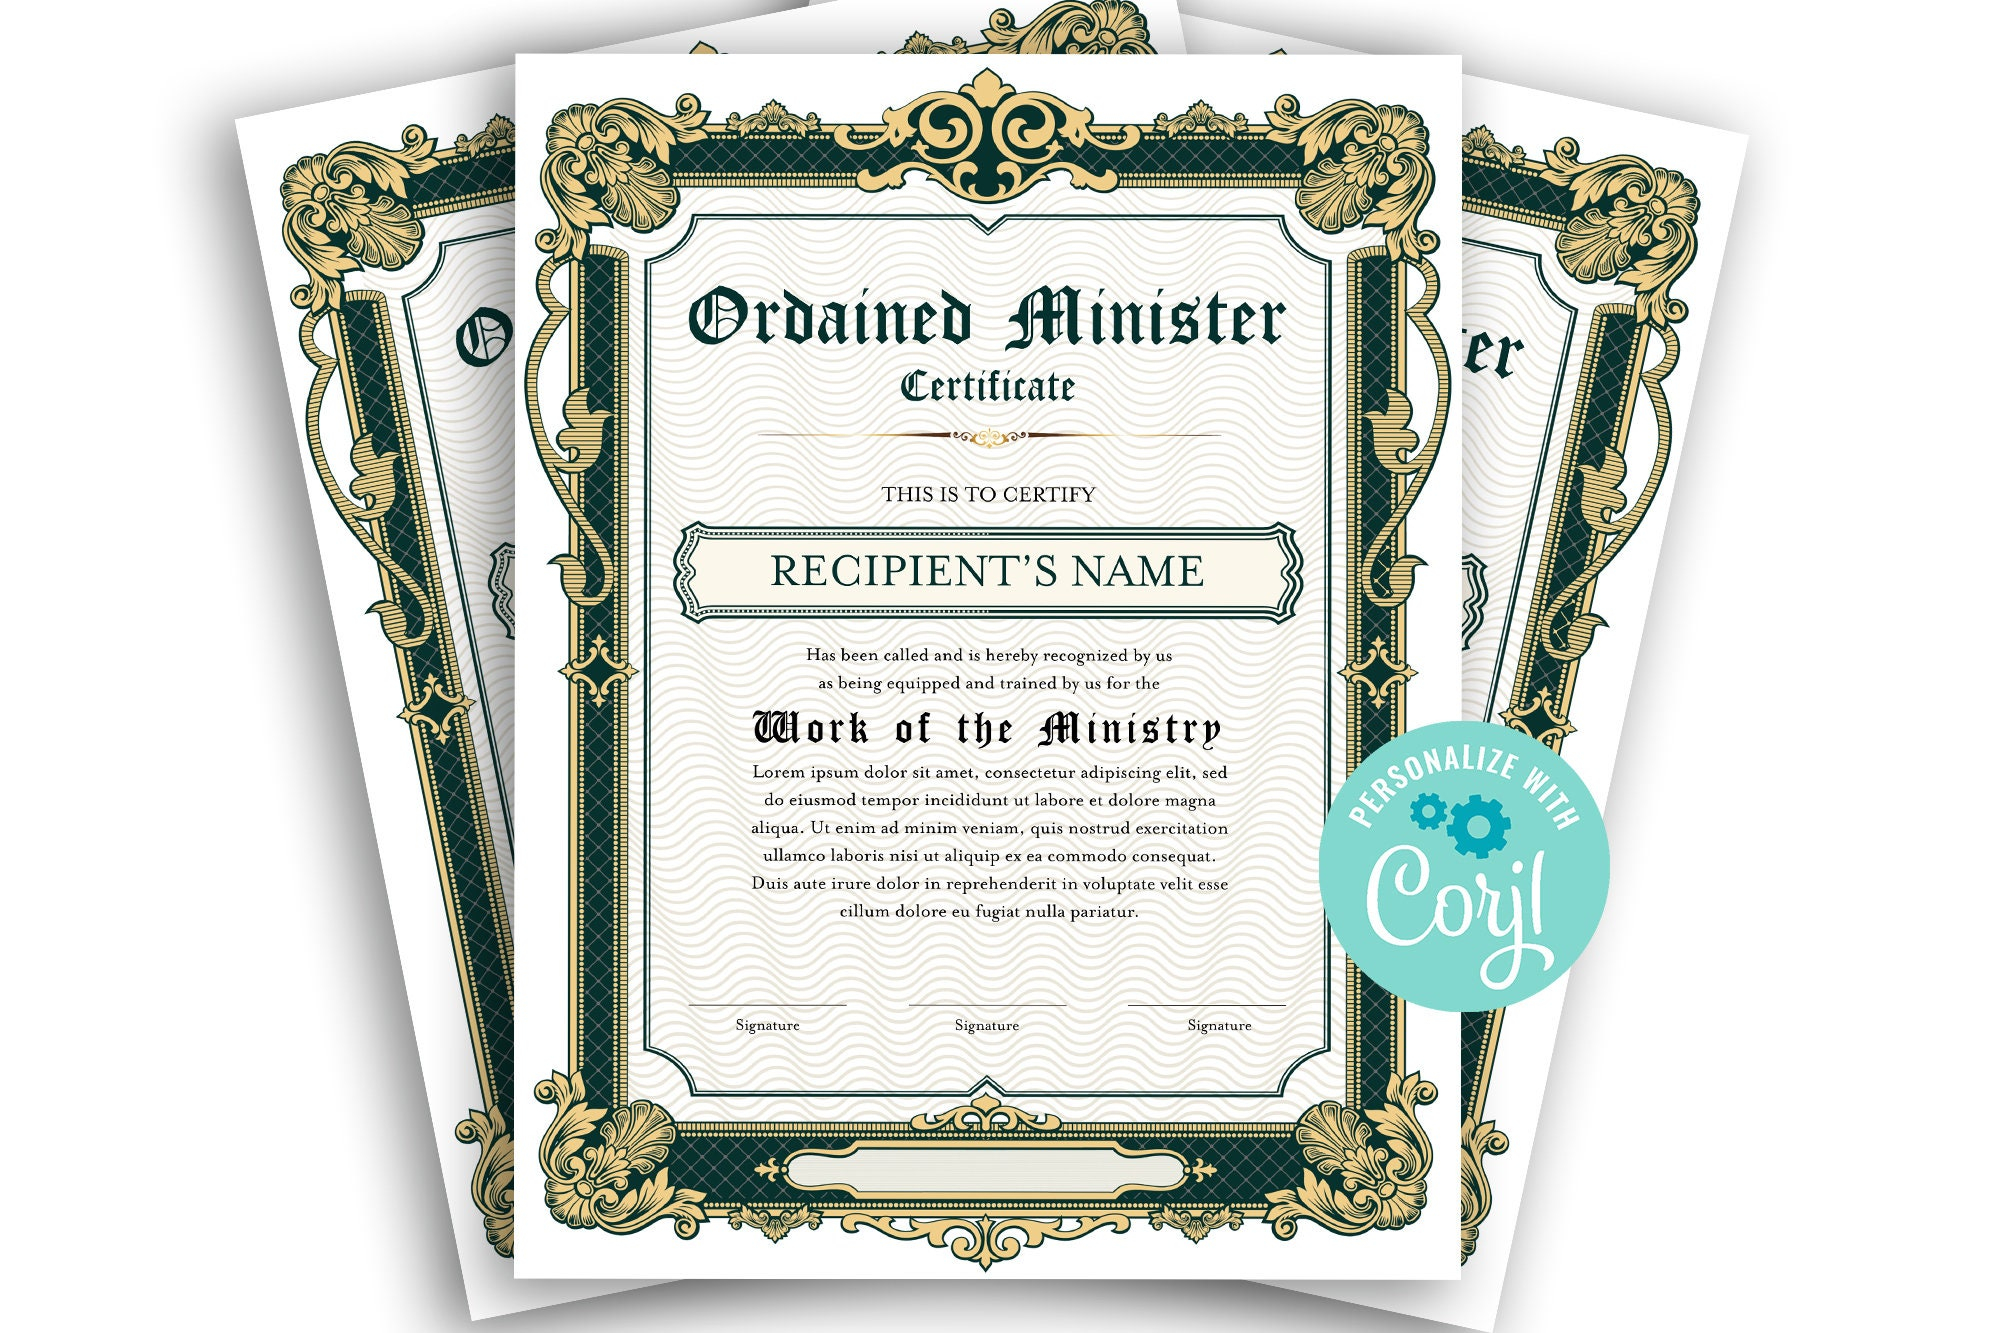 Certificate of Ordination Minister Editable Template Portrait - Etsy Intended For Certificate Of Ordination Template